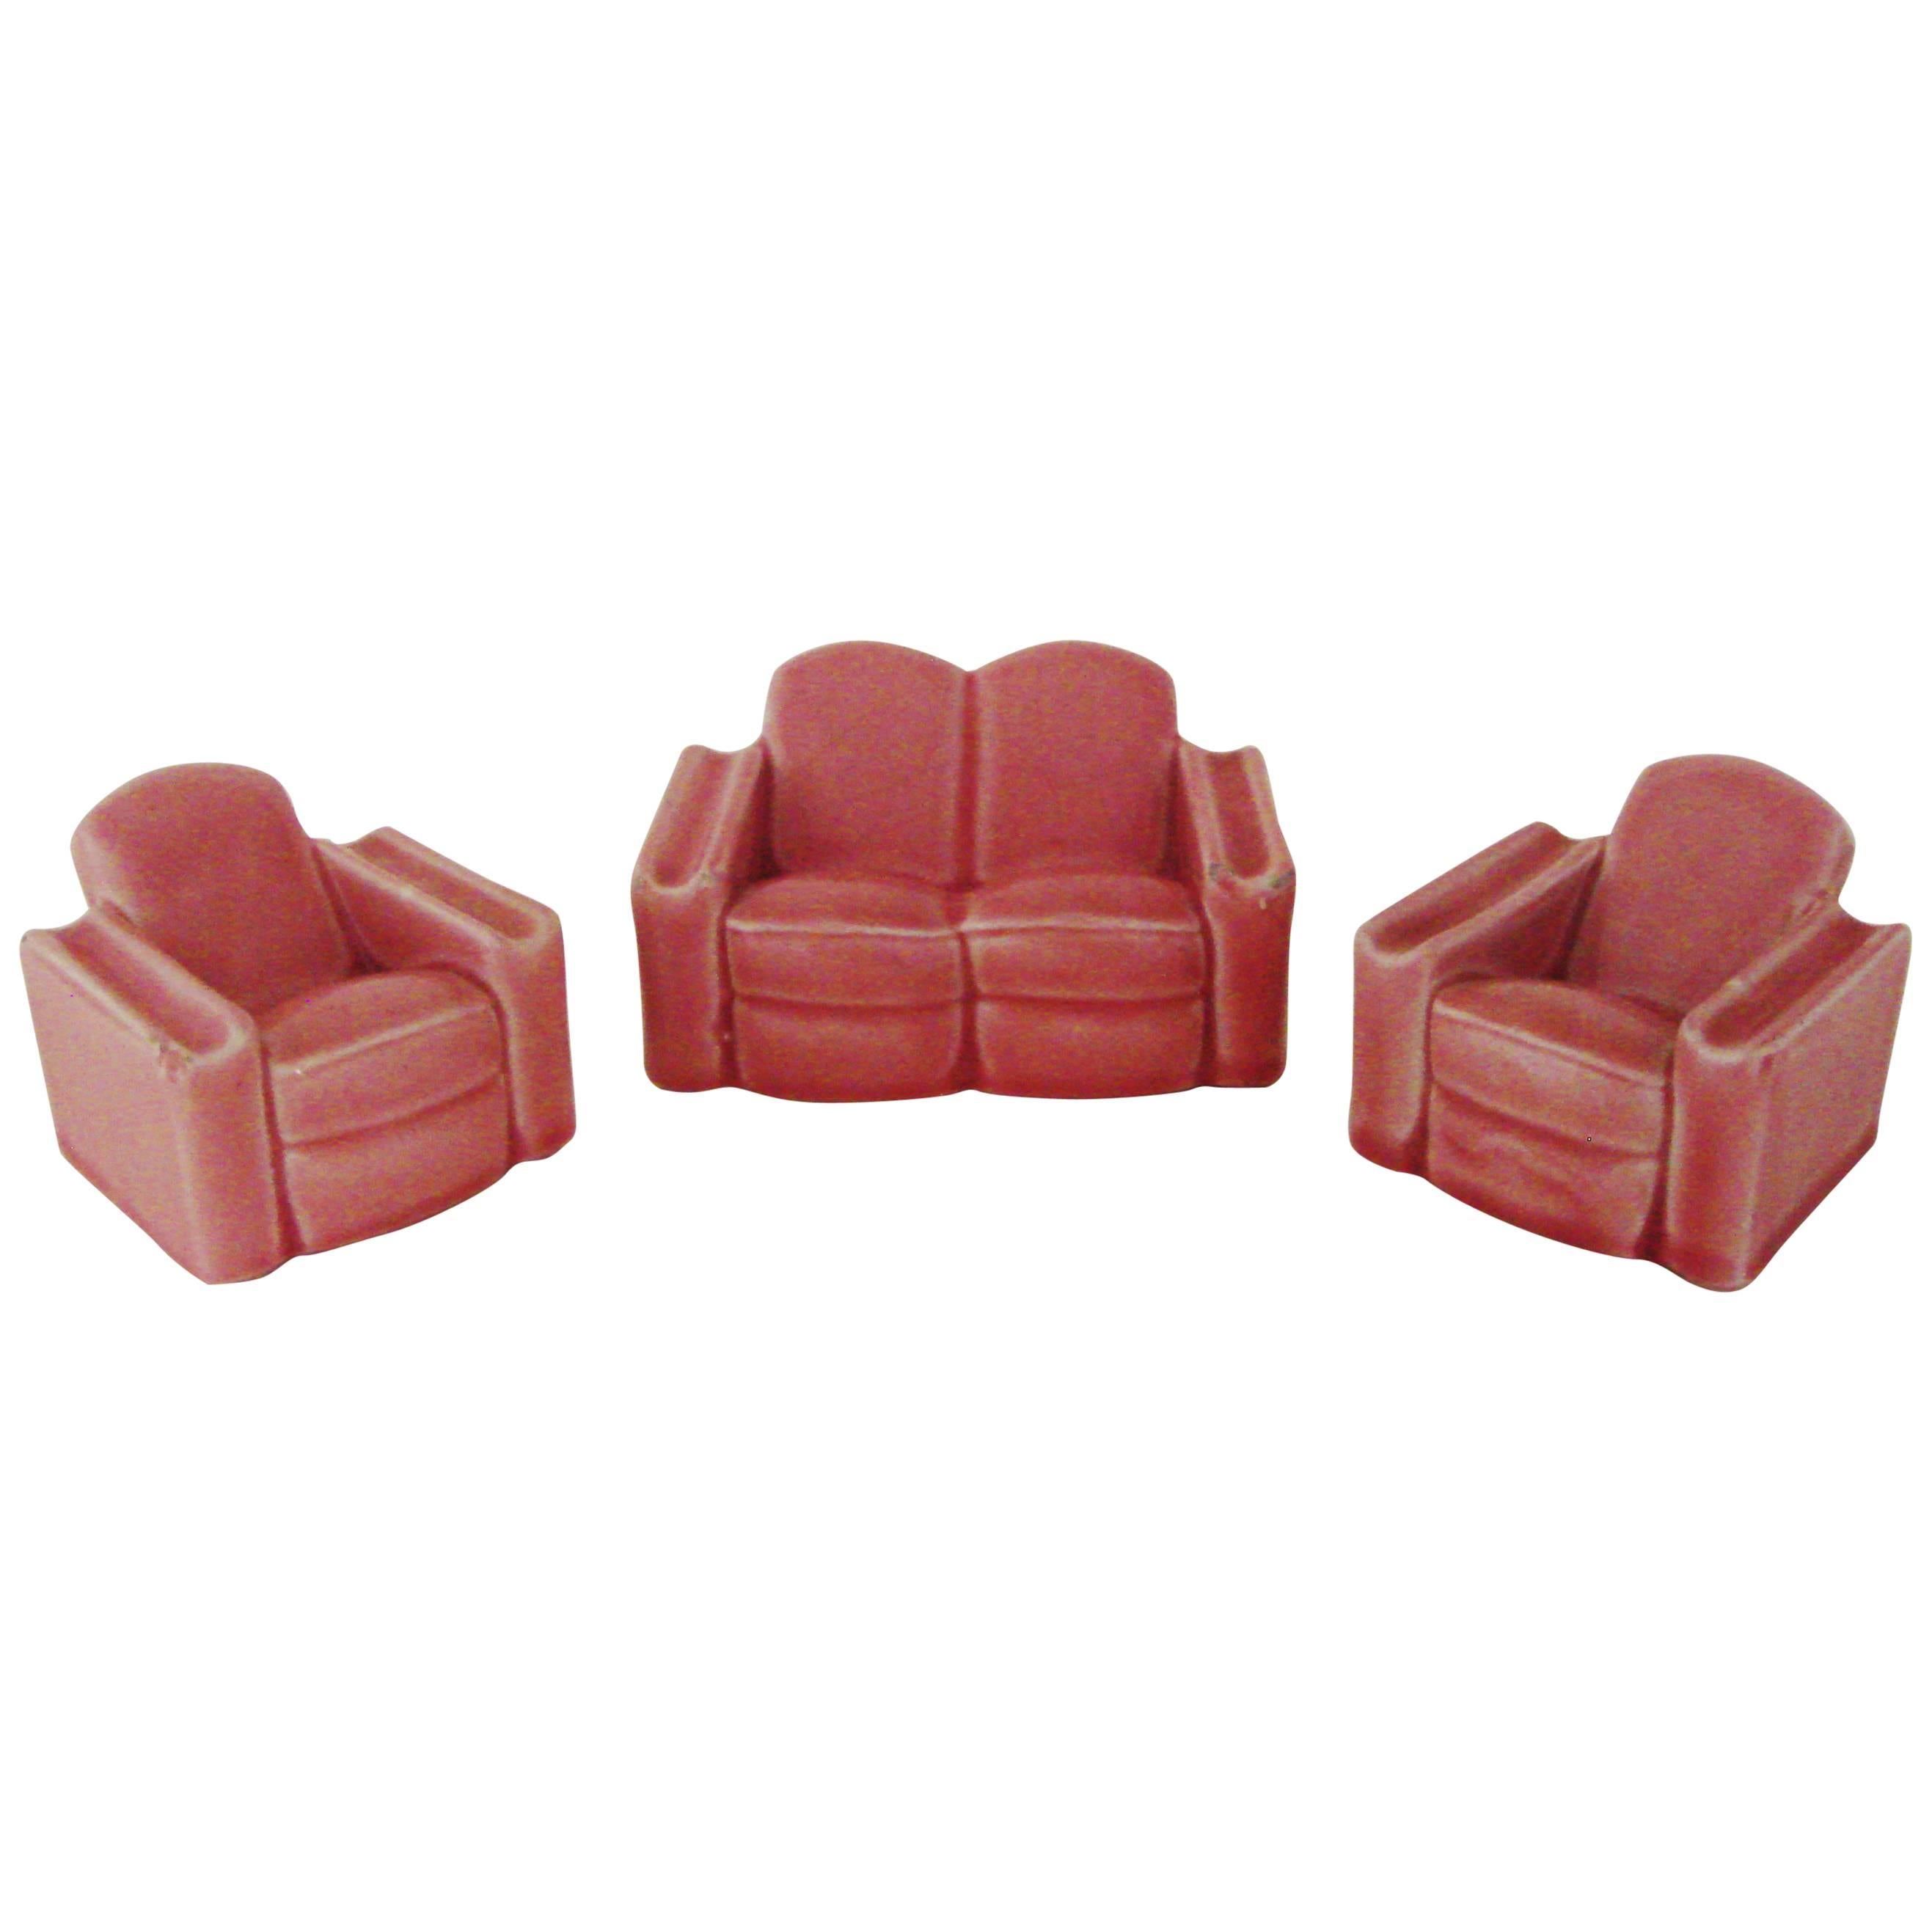 English Art Deco Ceramic Armchairs and Loveseat Three-Piece Ashtray Suite For Sale